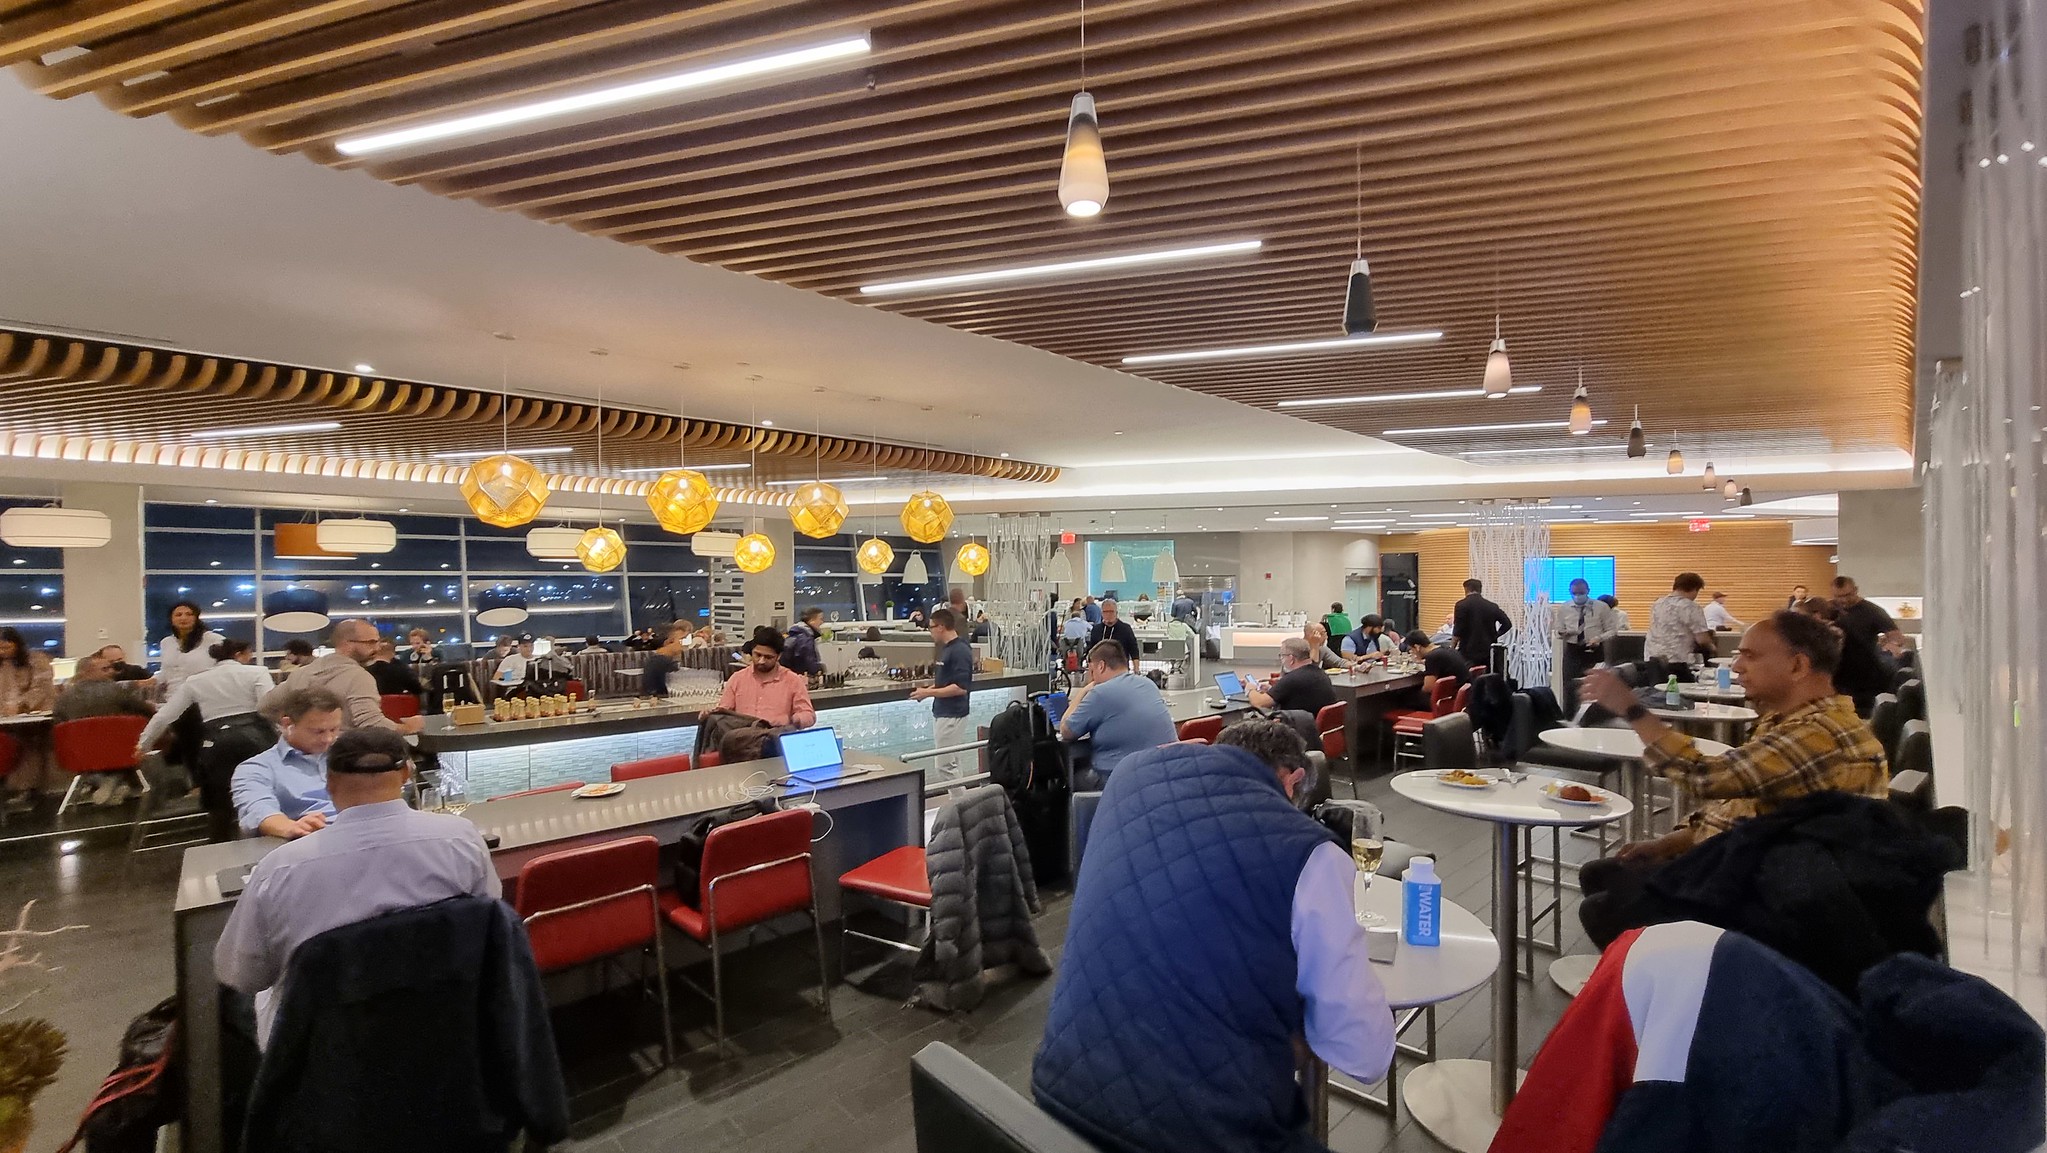 The old AA Flagship First Lounge at JFK T8 (from Nov 2022)